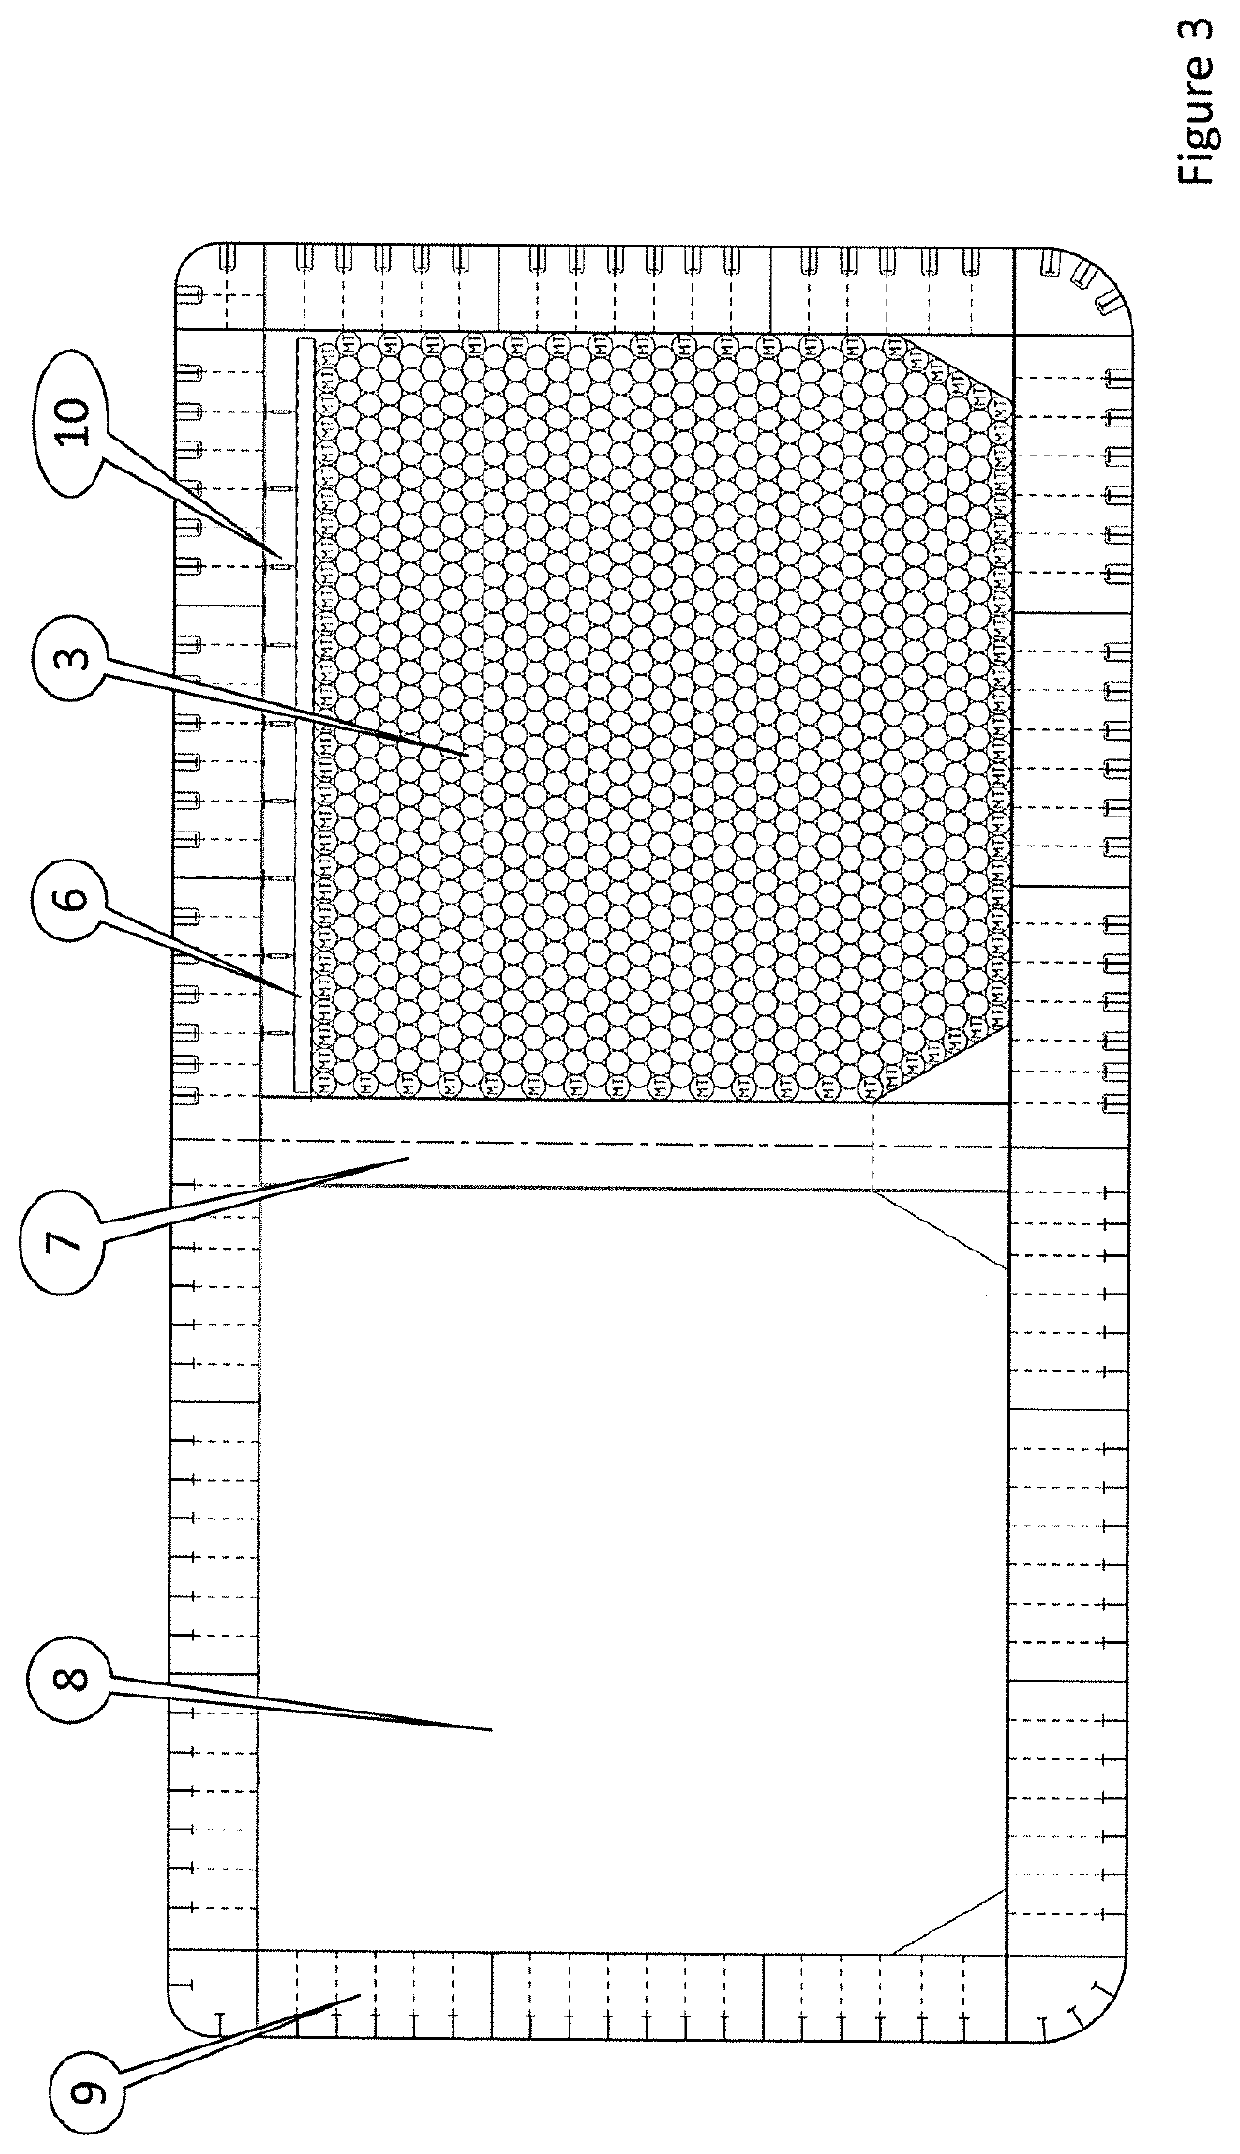 Apparatus for gas storage and transport